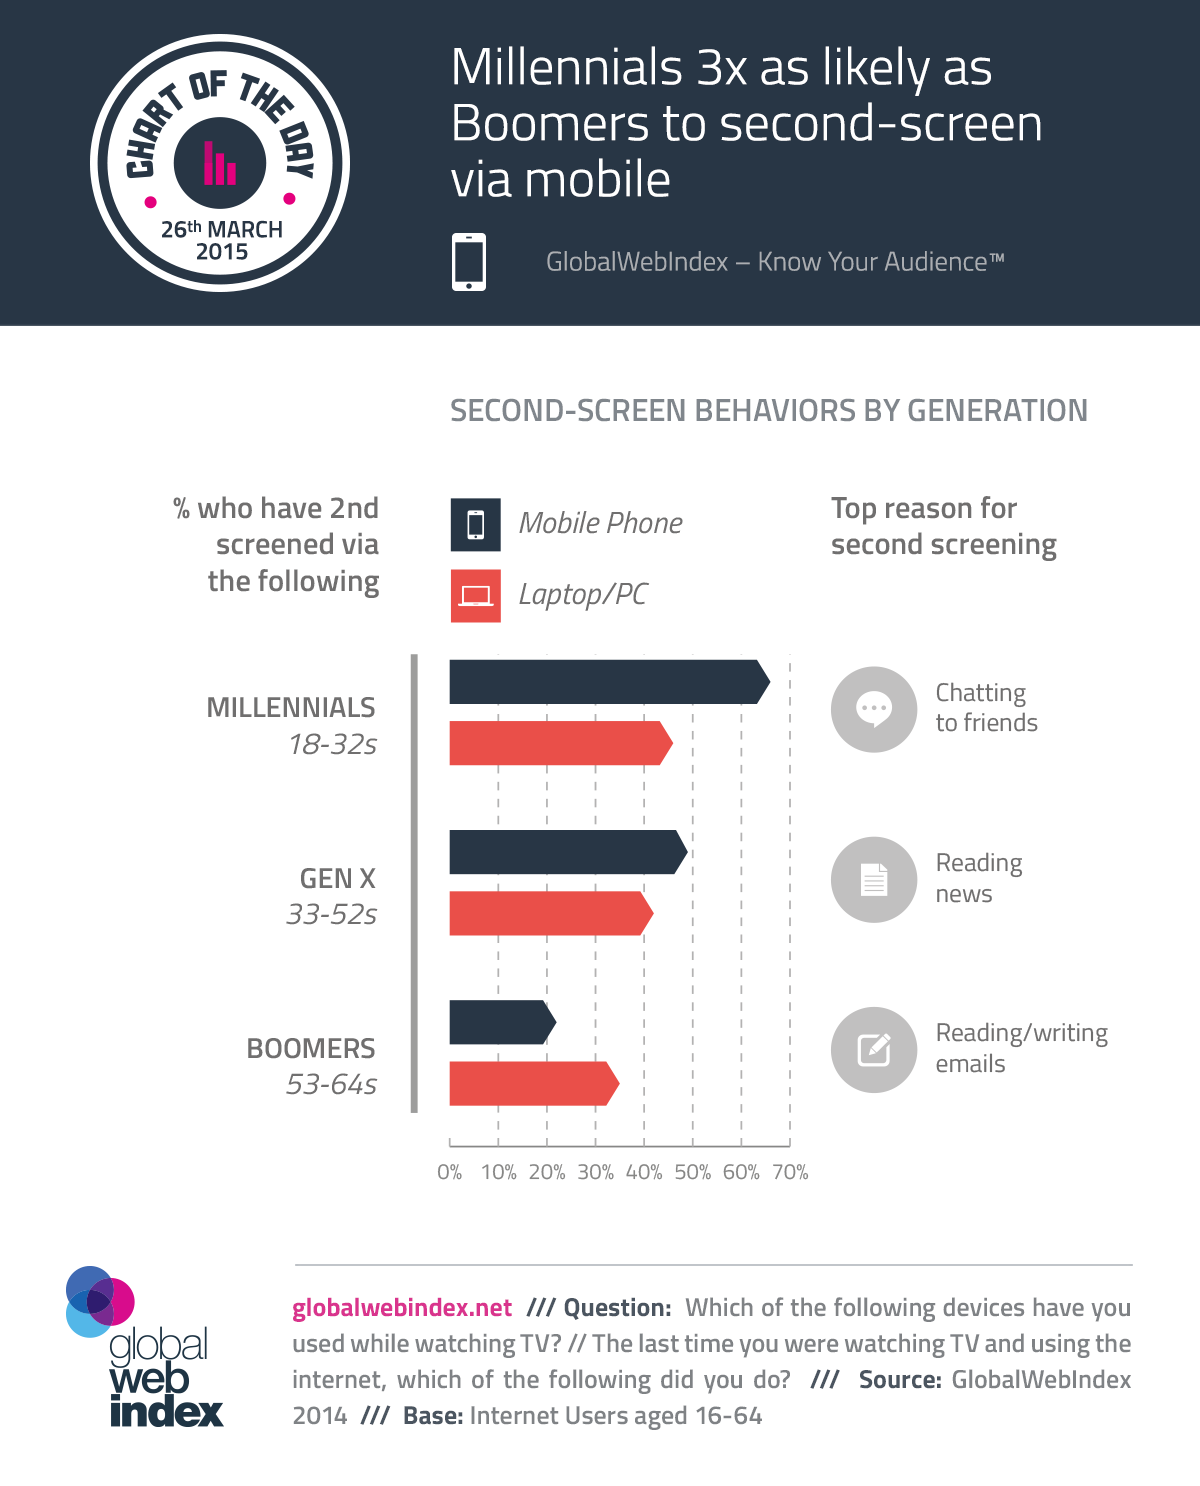 Millennials 3x as likely as Boomers to second-screen via mobile